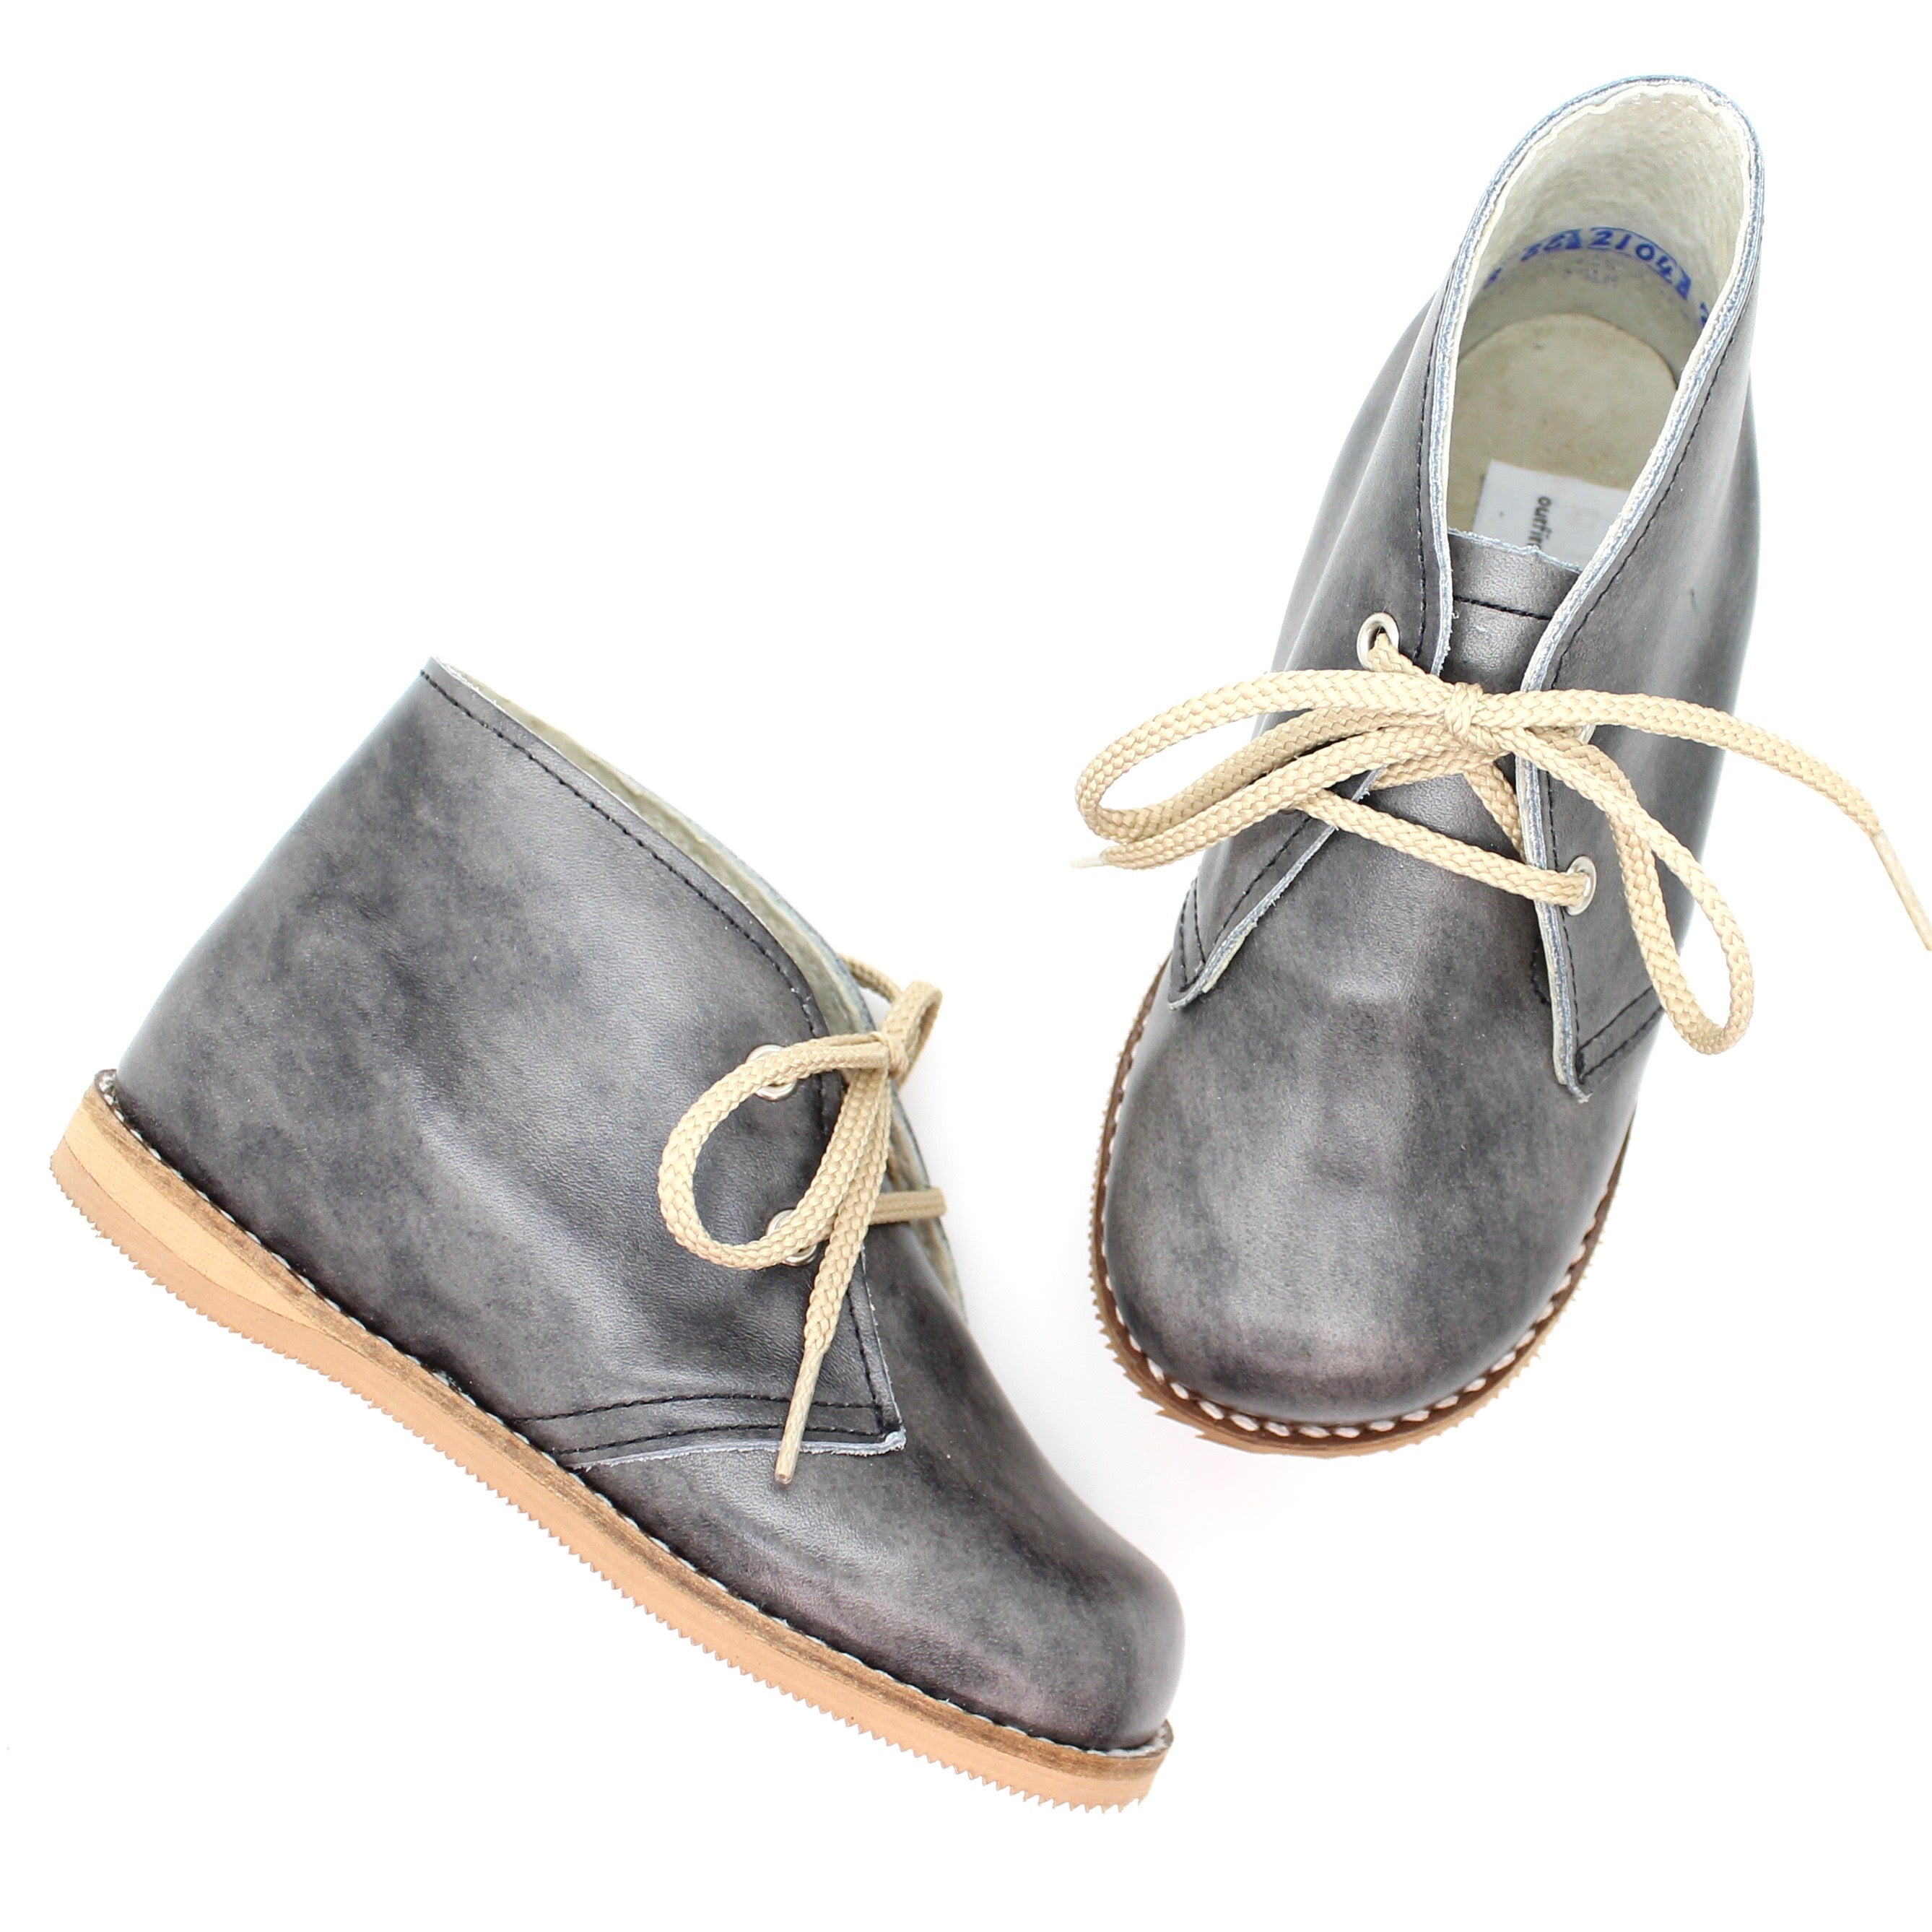 the hard soled oxford: marble grey 